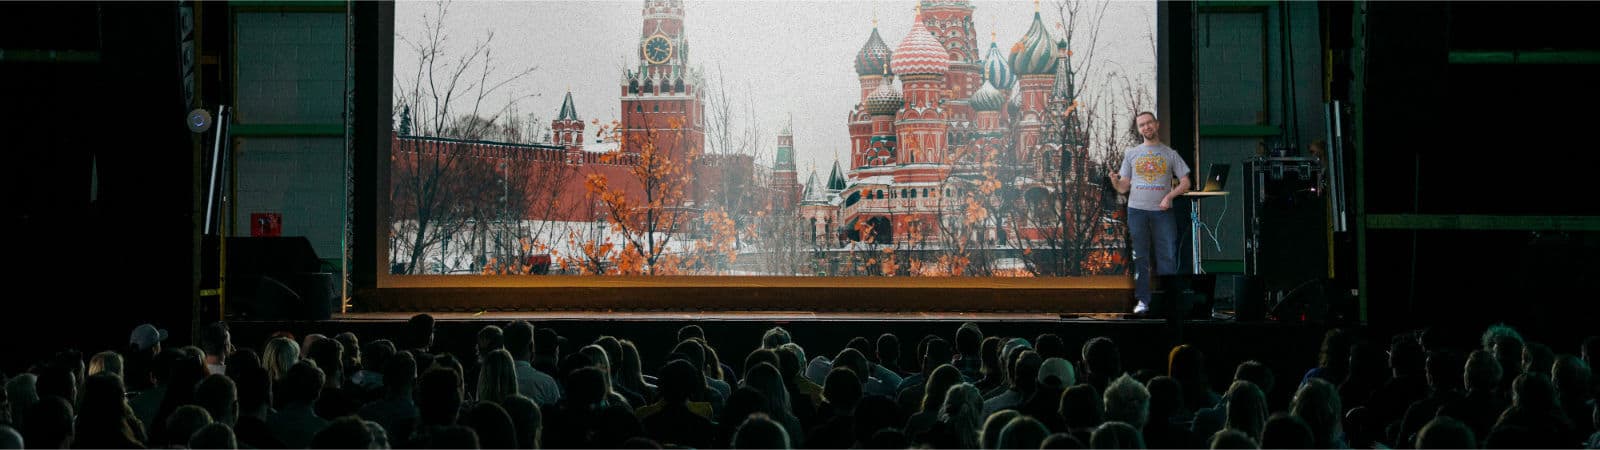 Kenny Rayman on History and Travel in Russia